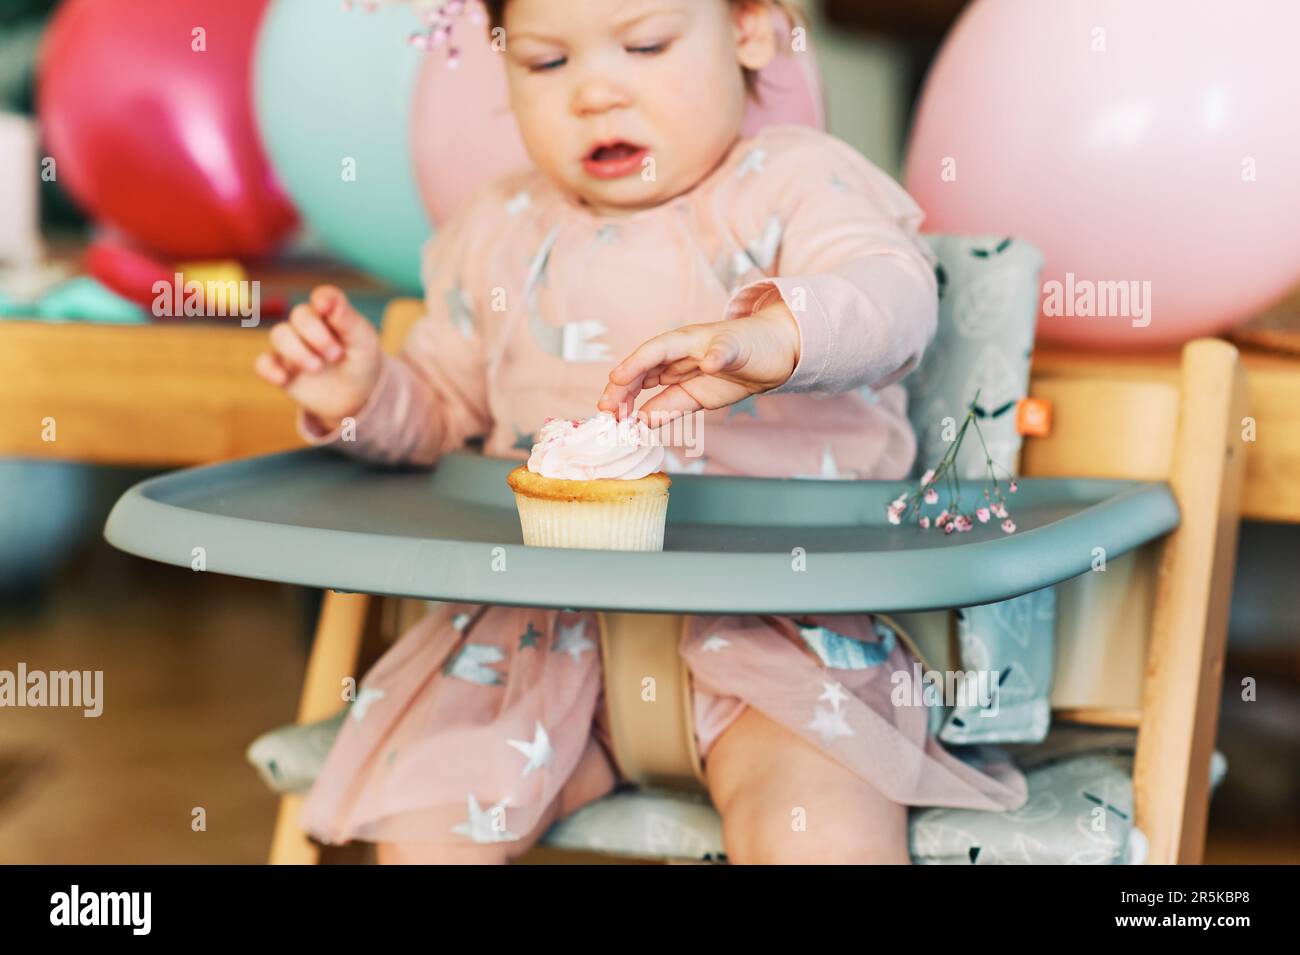 Adorable 1 year old baby girl eating cupcake, happy child sitting in a chair, tasting sweet dessert, first birthday Stock Photo